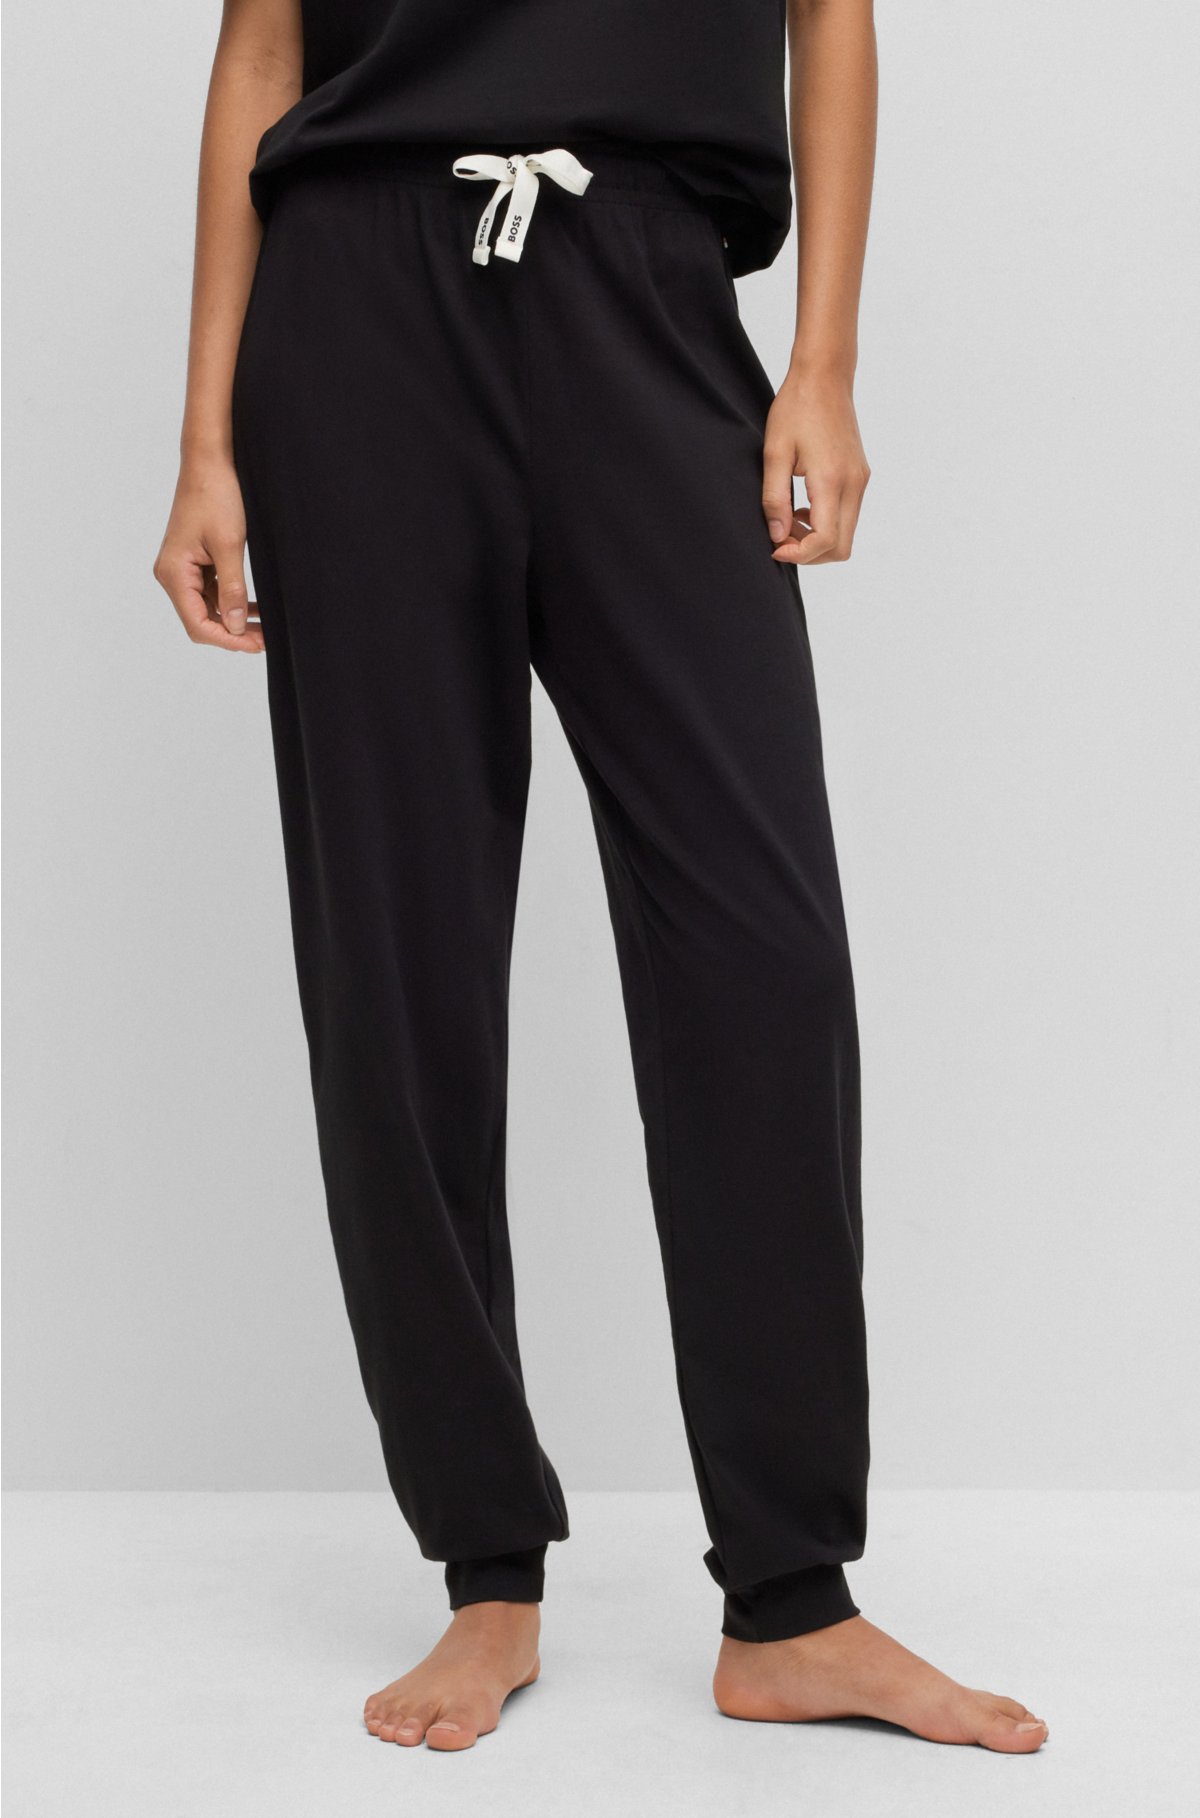 BOSS - Stretch-cotton pyjama bottoms with branded cords